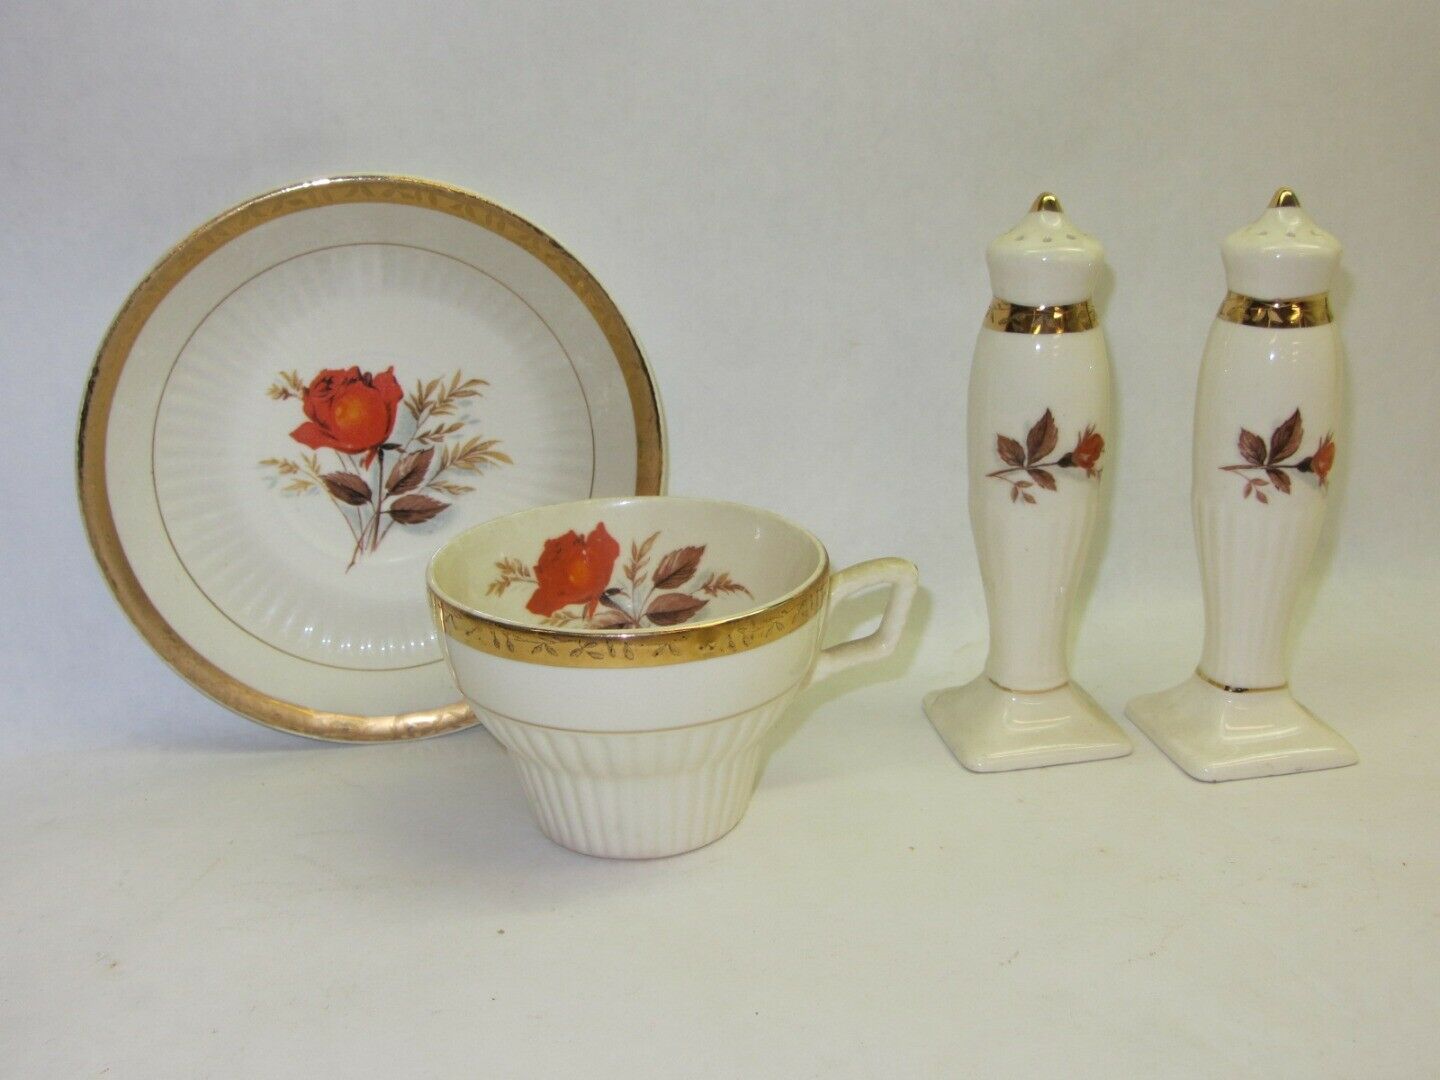 Primary image for LaMode China USA 22K Warranted Vintage Cup Saucer Salt Pepper Shakers Red Rose